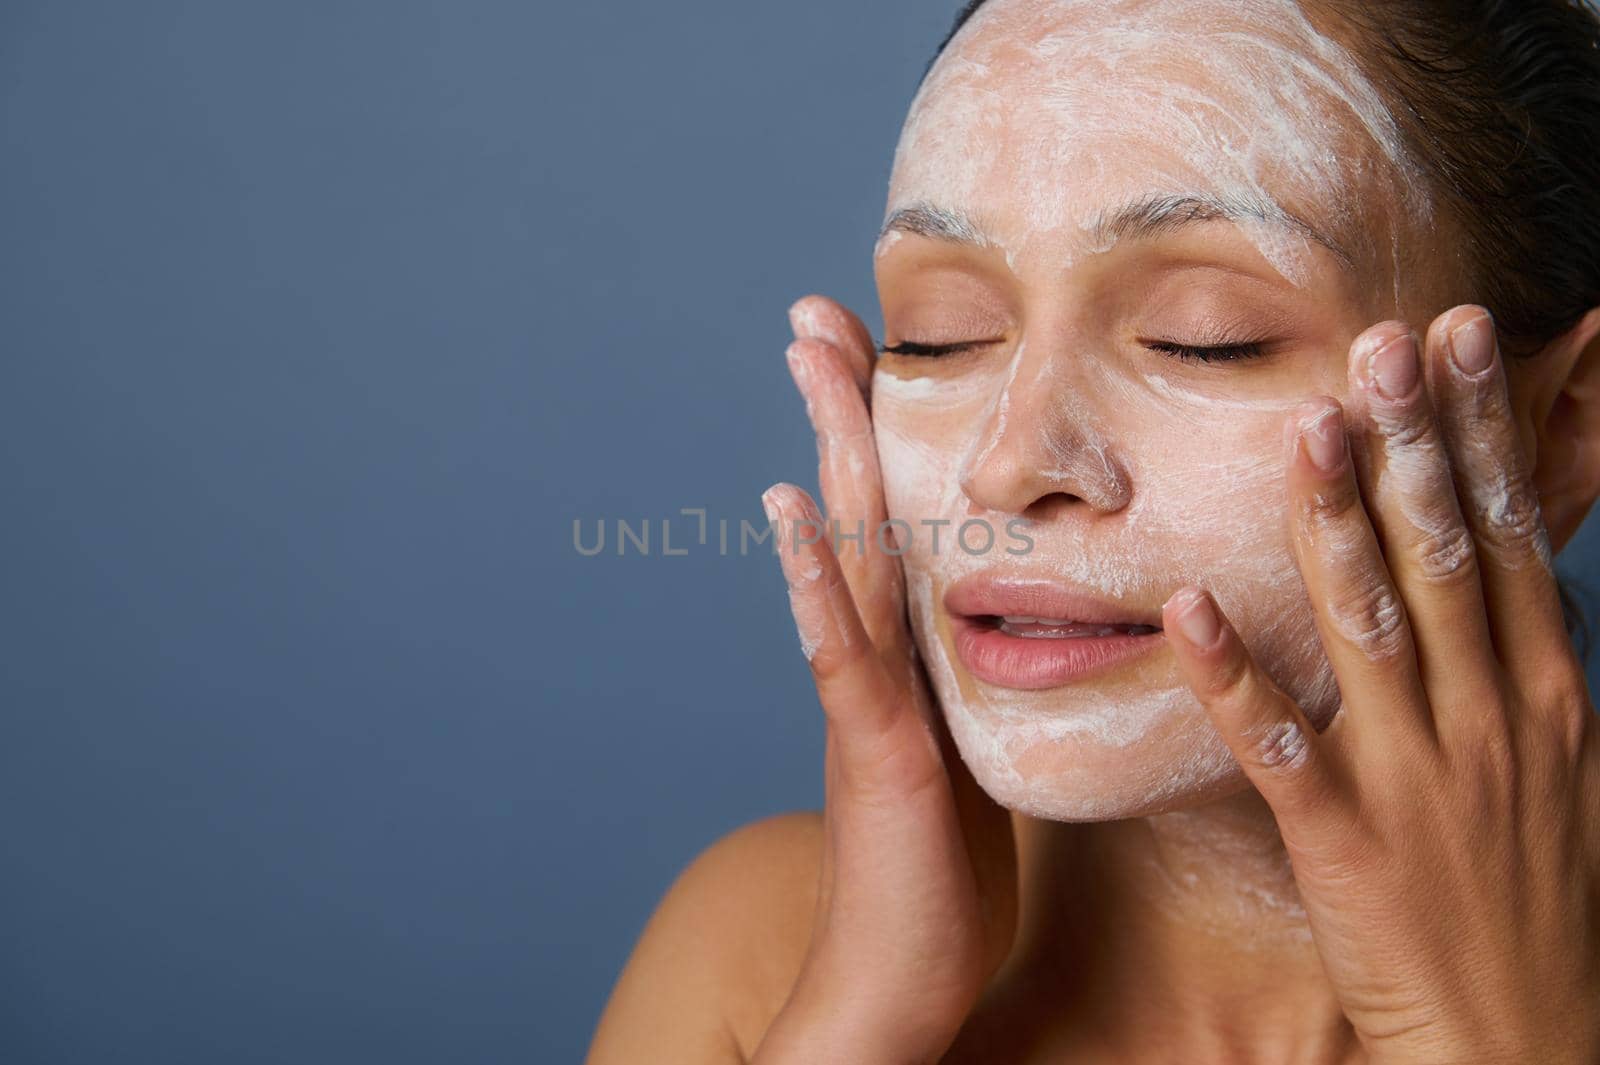 Beautiful woman massaging her face while removing make-up using a foam cleansing cosmetic product, and refreshing her skin with an exfoliant beauty product, isolated over gray background. Close-up. by artgf